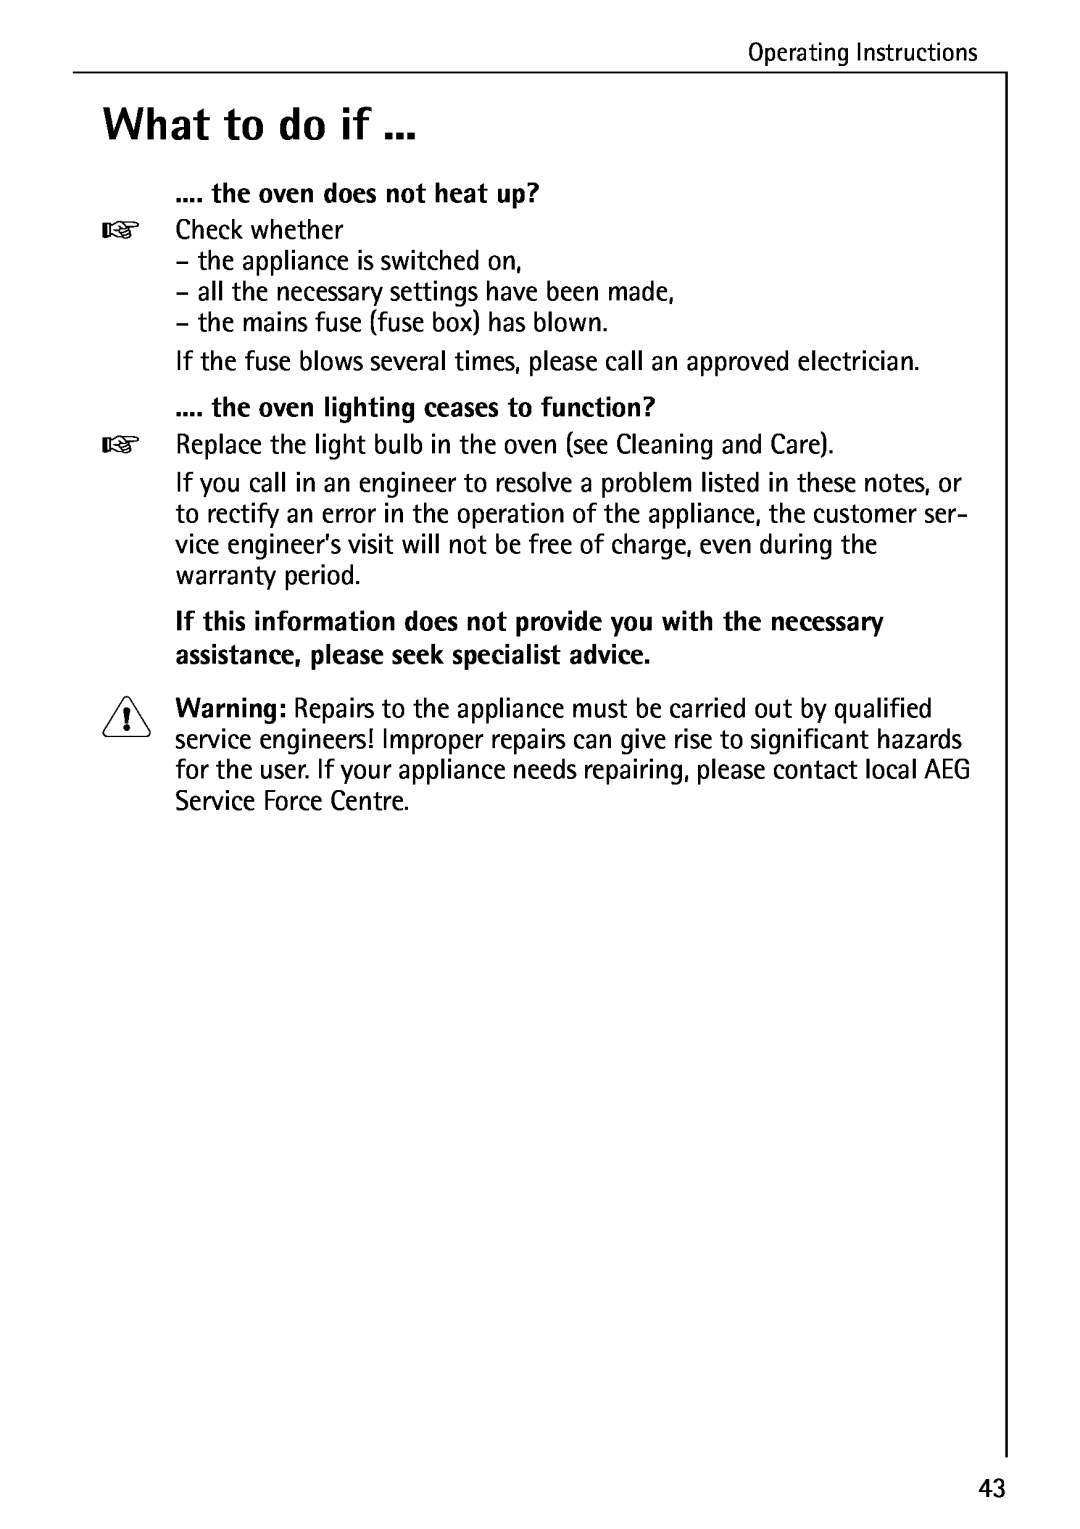 AEG 5033 V operating instructions What to do if, the oven does not heat up?, the oven lighting ceases to function? 